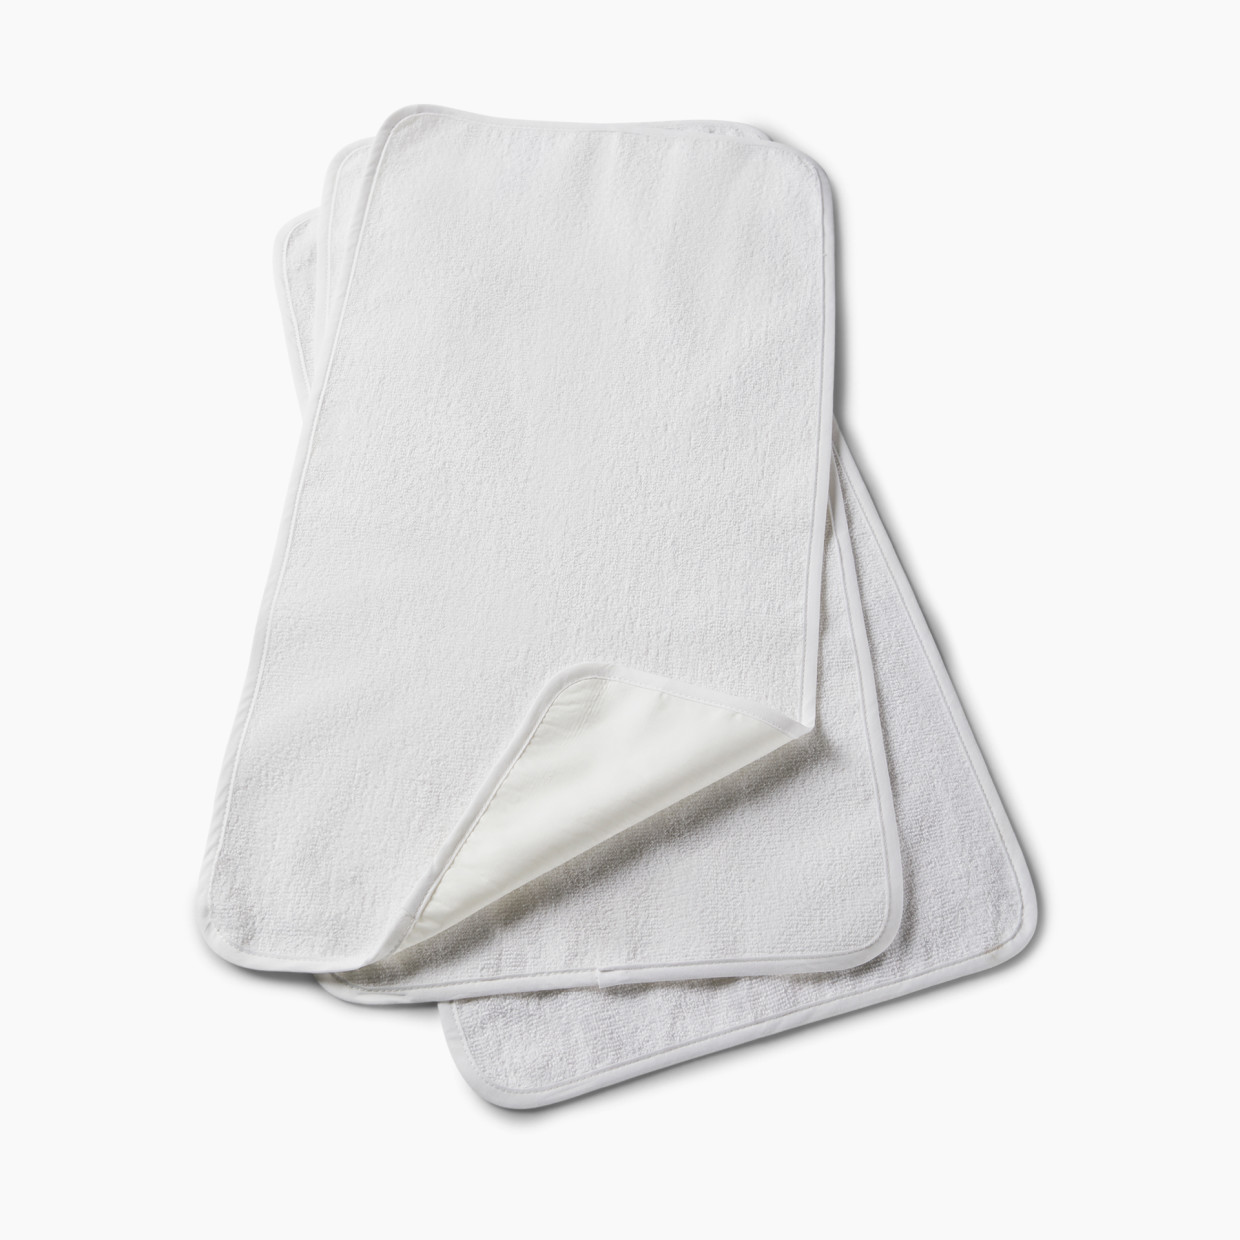 Summer Waterproof Changing Pad Liners (3-Pack) - White.